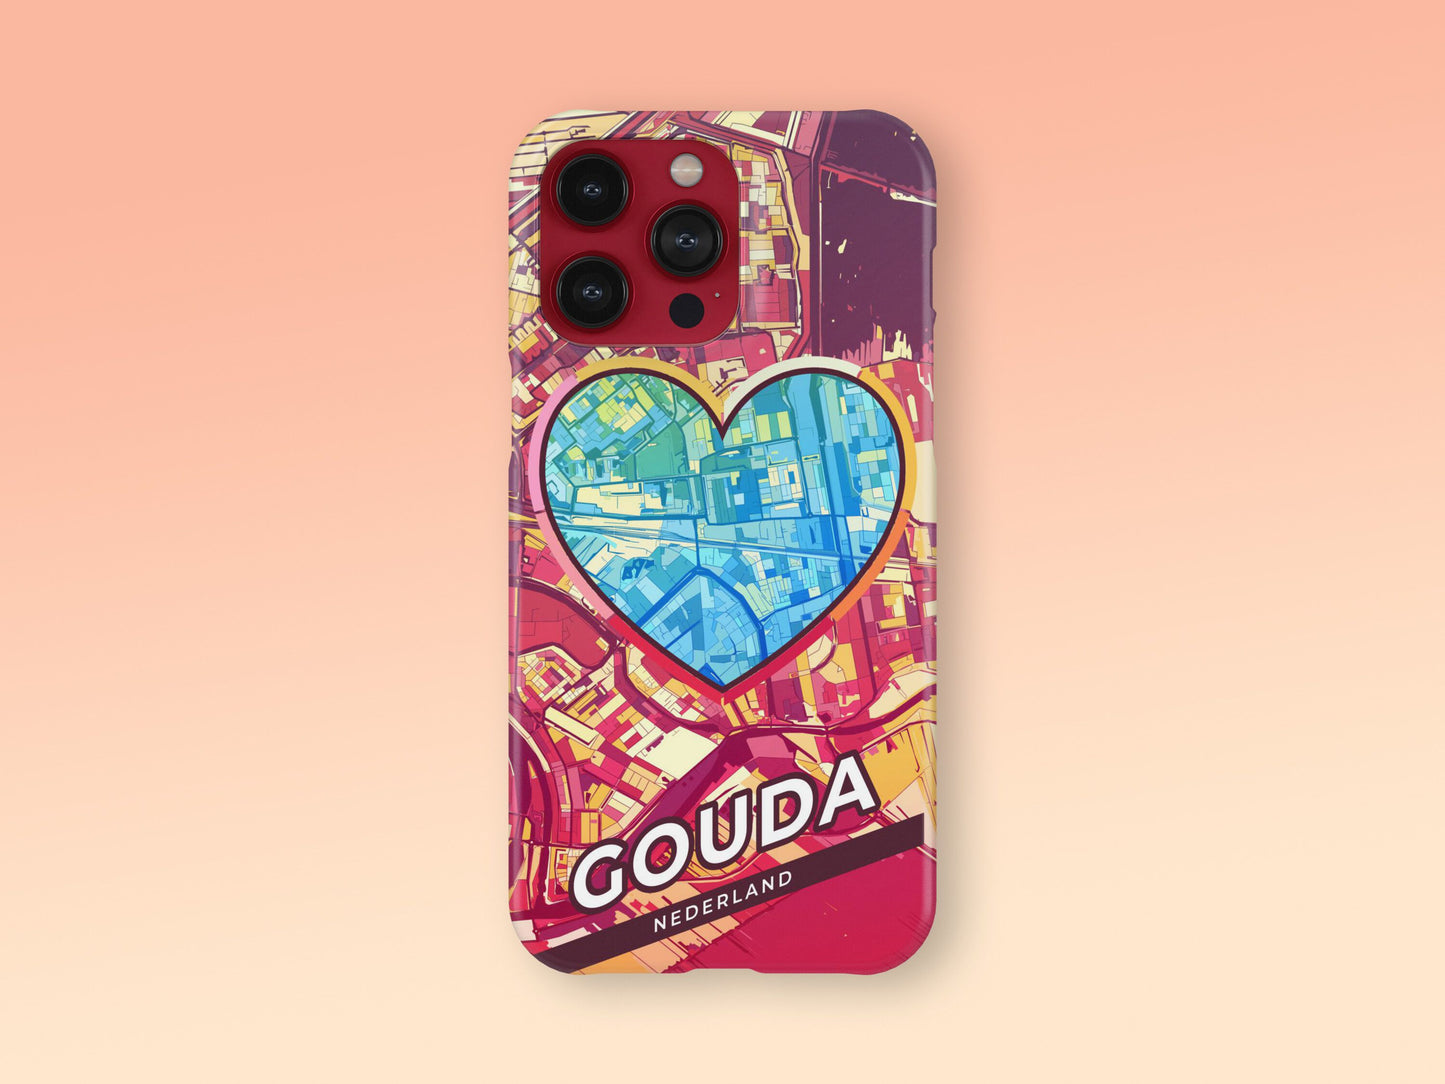 Gouda Netherlands slim phone case with colorful icon. Birthday, wedding or housewarming gift. Couple match cases. 2